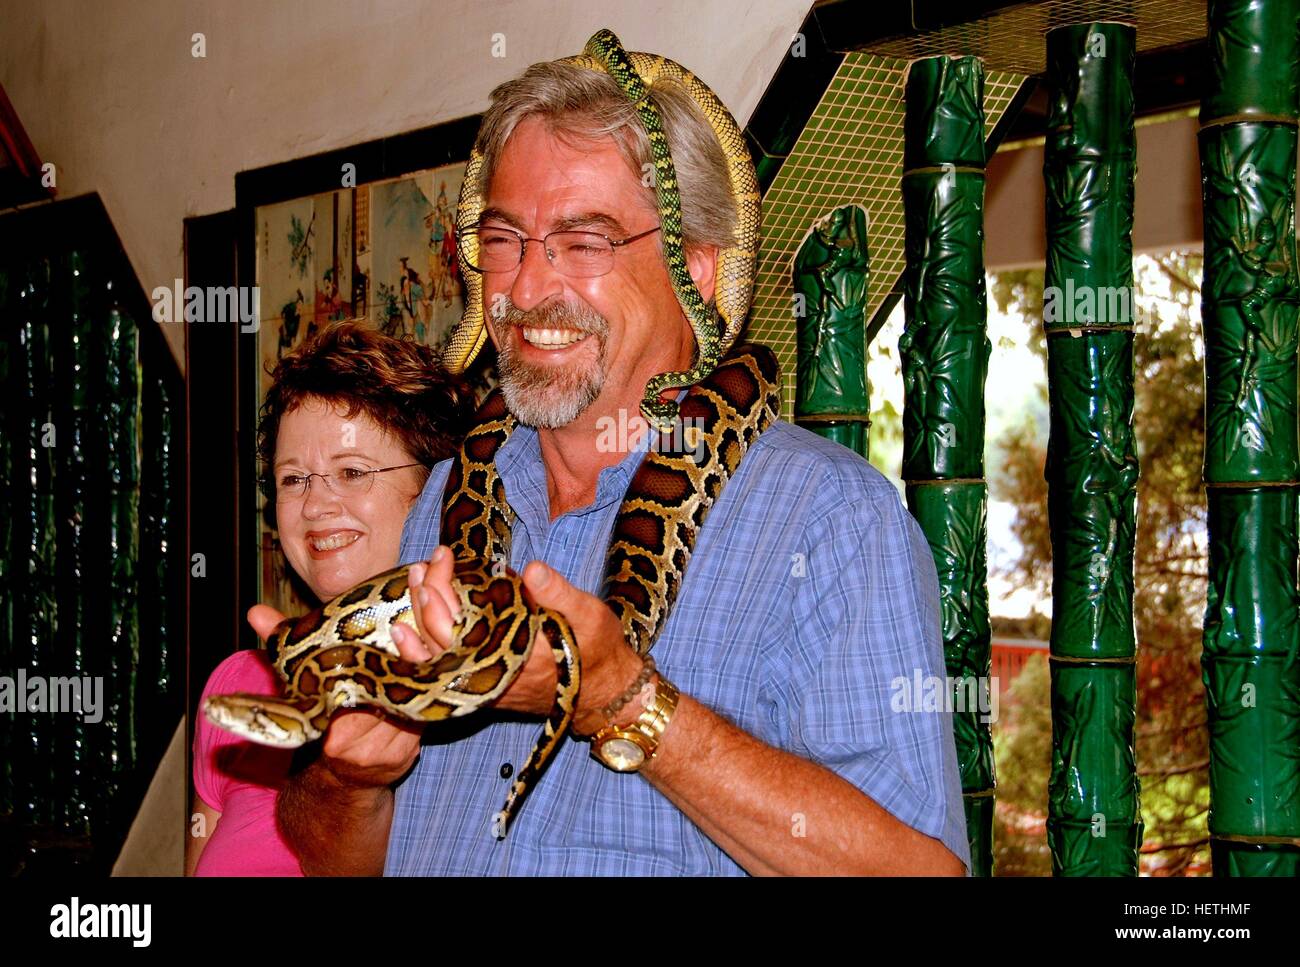 Penang, Malaysia - January 10, 2007:  A visitor to the famed 1851 Snake Temple poses with some of the resident viper snakes Stock Photo